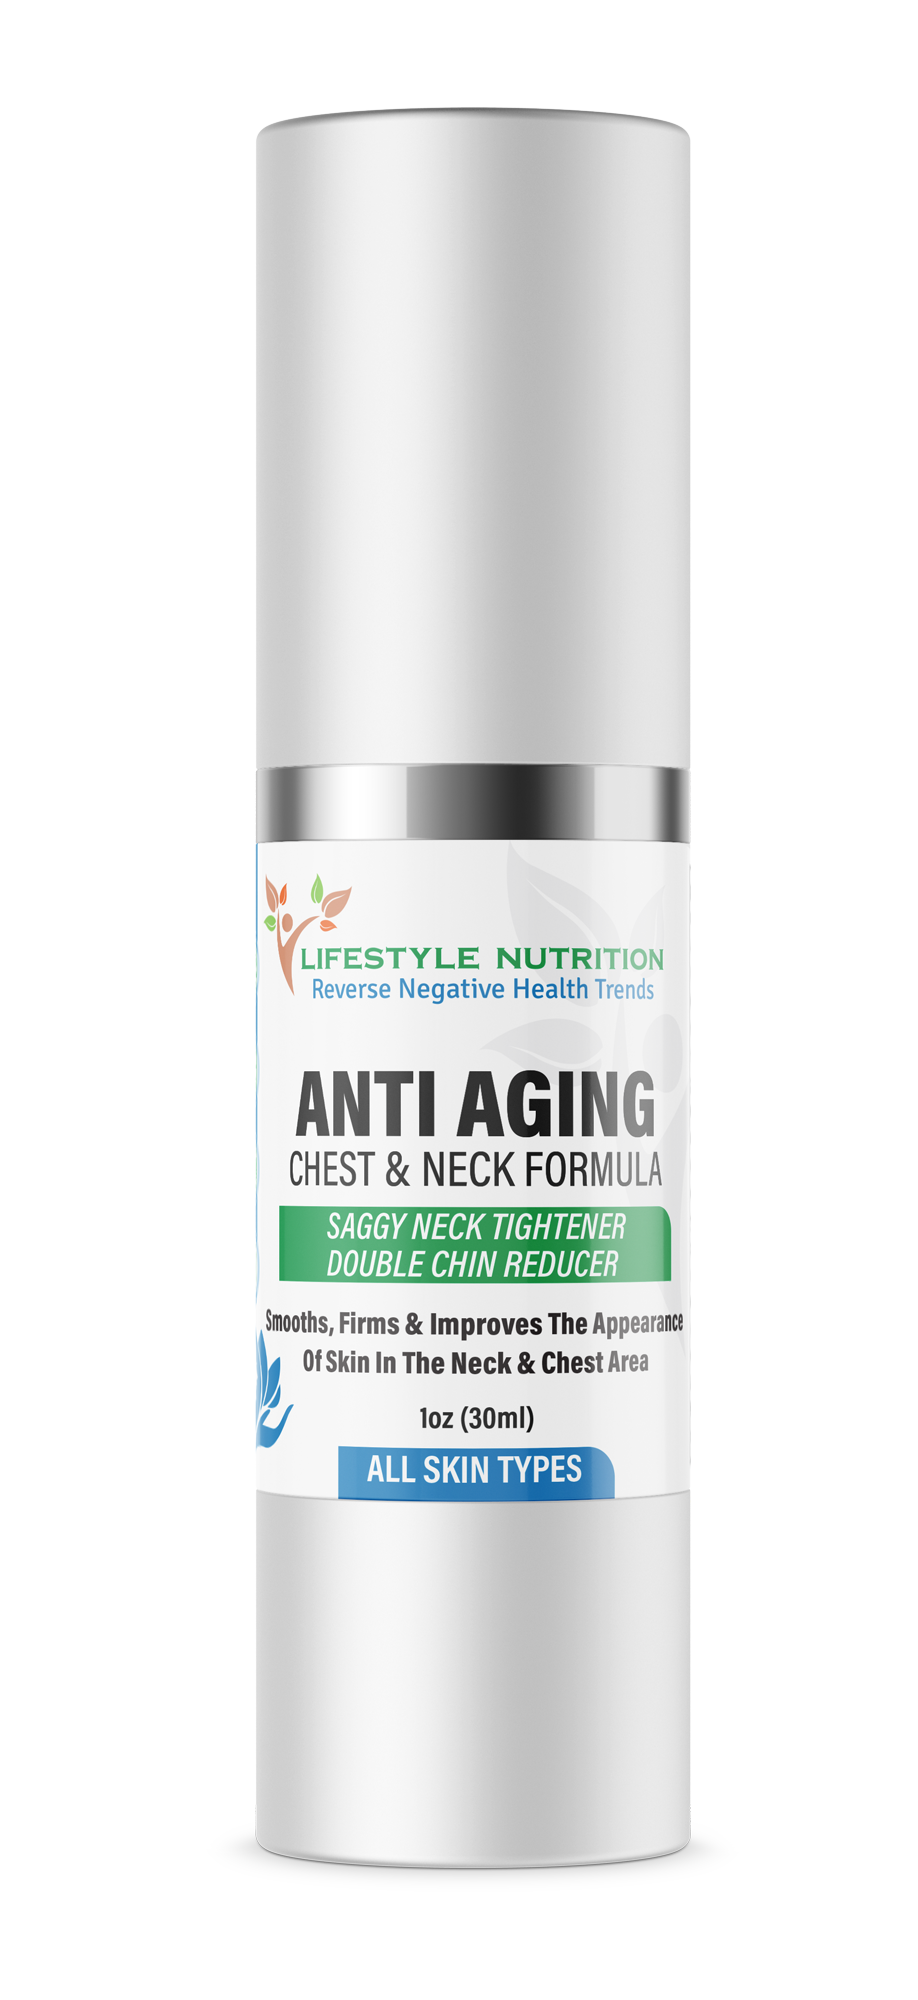 ANTI-AGING CHEST & NECK FORMULA (6-Pack)